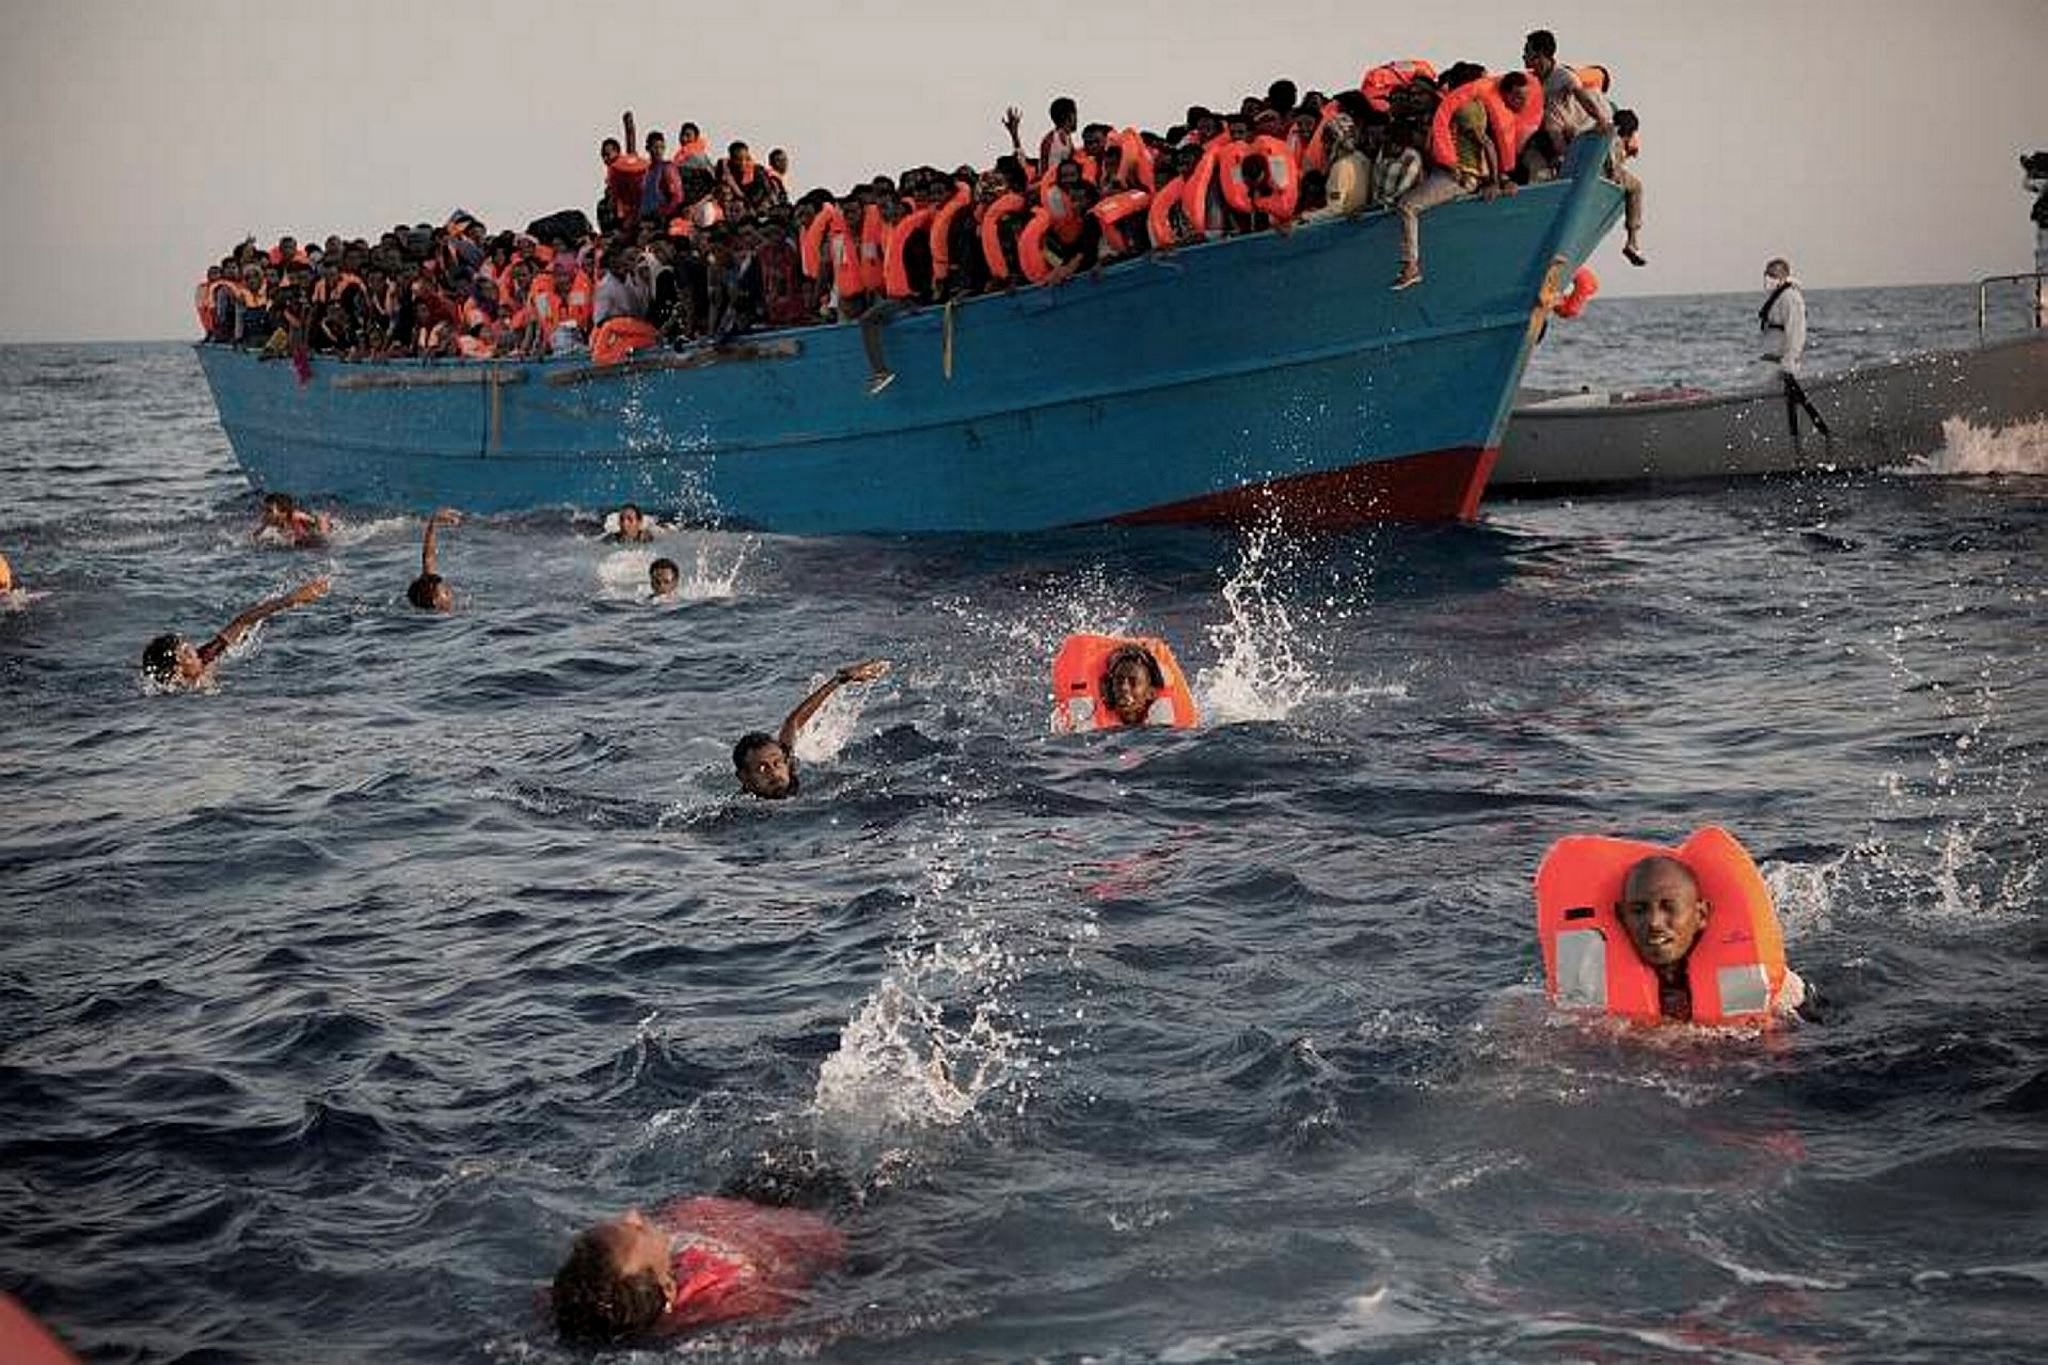 Migrants, most of them from Eritrea, jump into the water from a crowded wooden boat as they are helped by members of an NGO during a rescue operation at the Mediterranean sea. 